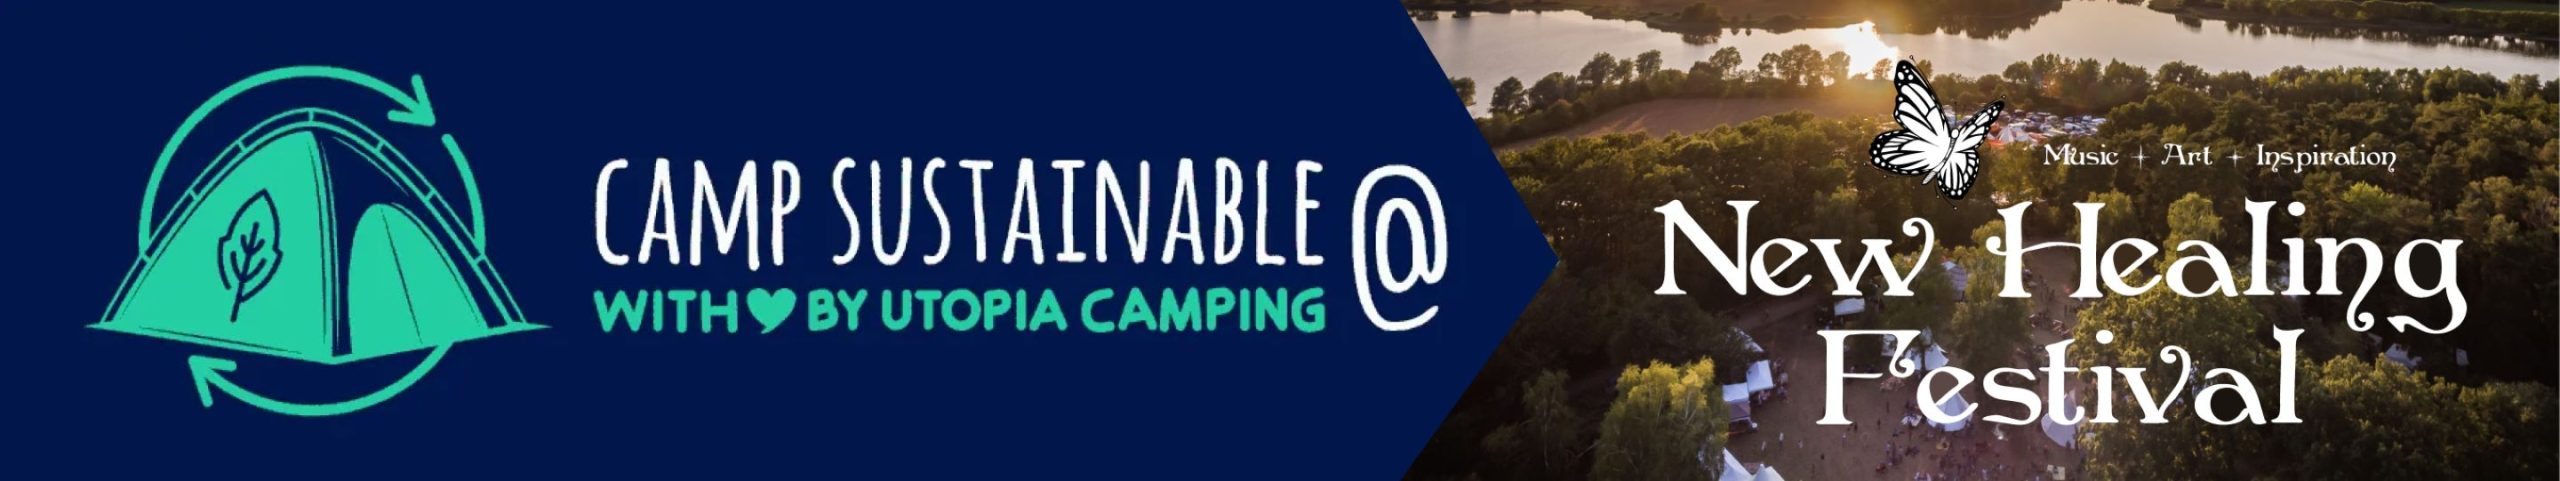 Sustainable camping solutions for festival-goers - Utopia Camping - With our sustainable solutions at festivals, we tackle piles of garbage full of camping gear by reusing camping stuff left behind. rent a tent, festival, camping equipment for rent